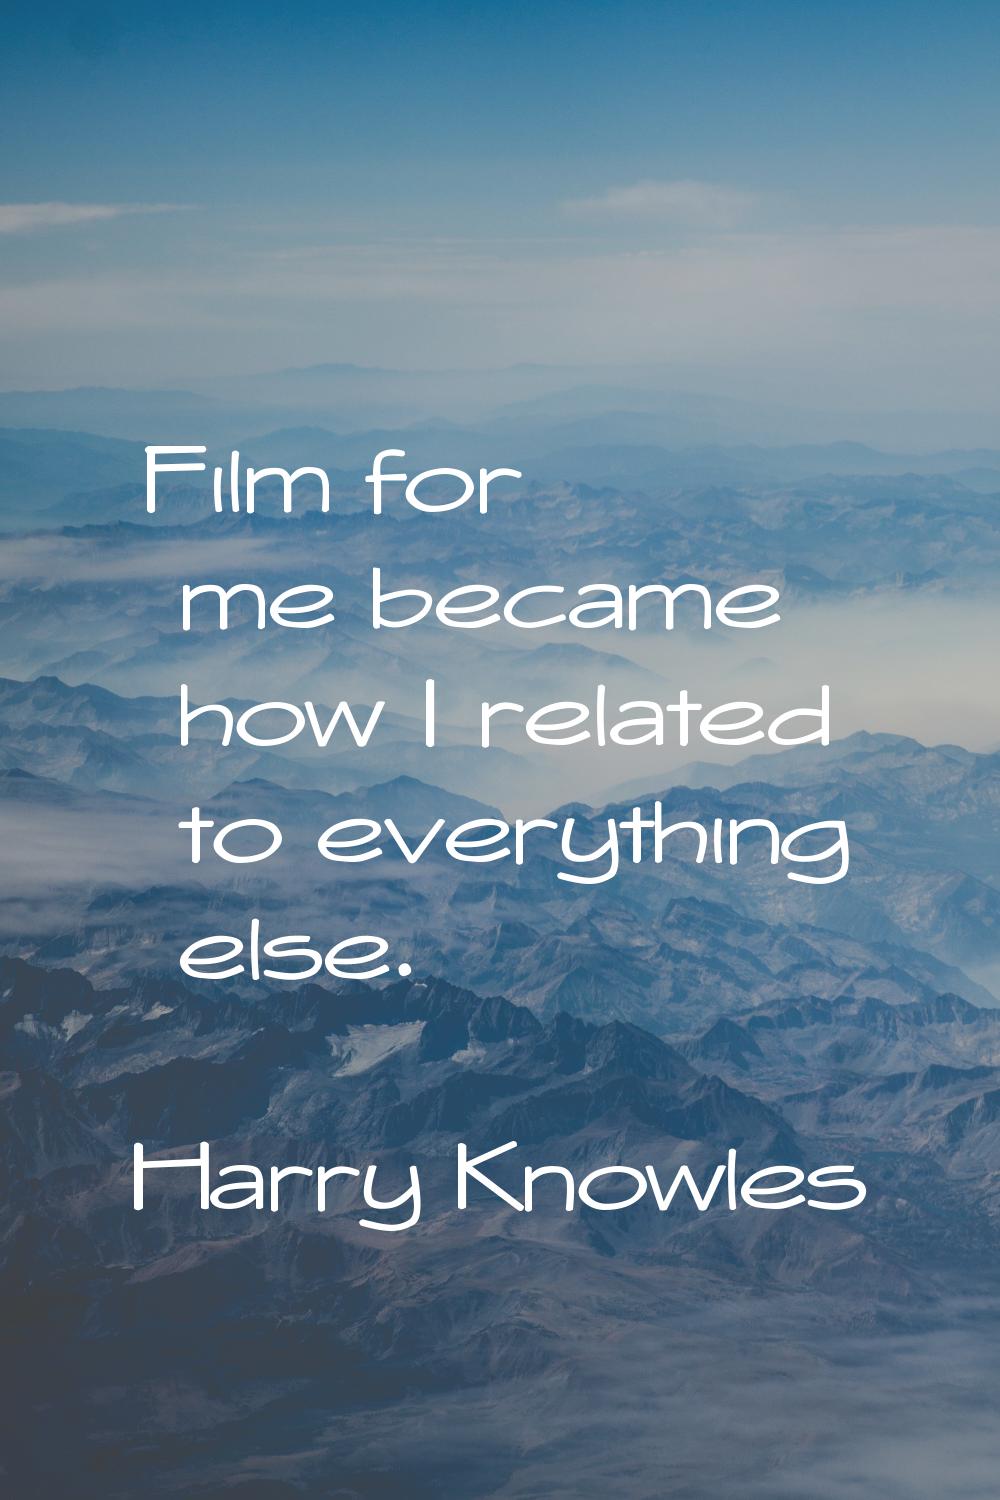 Film for me became how I related to everything else.